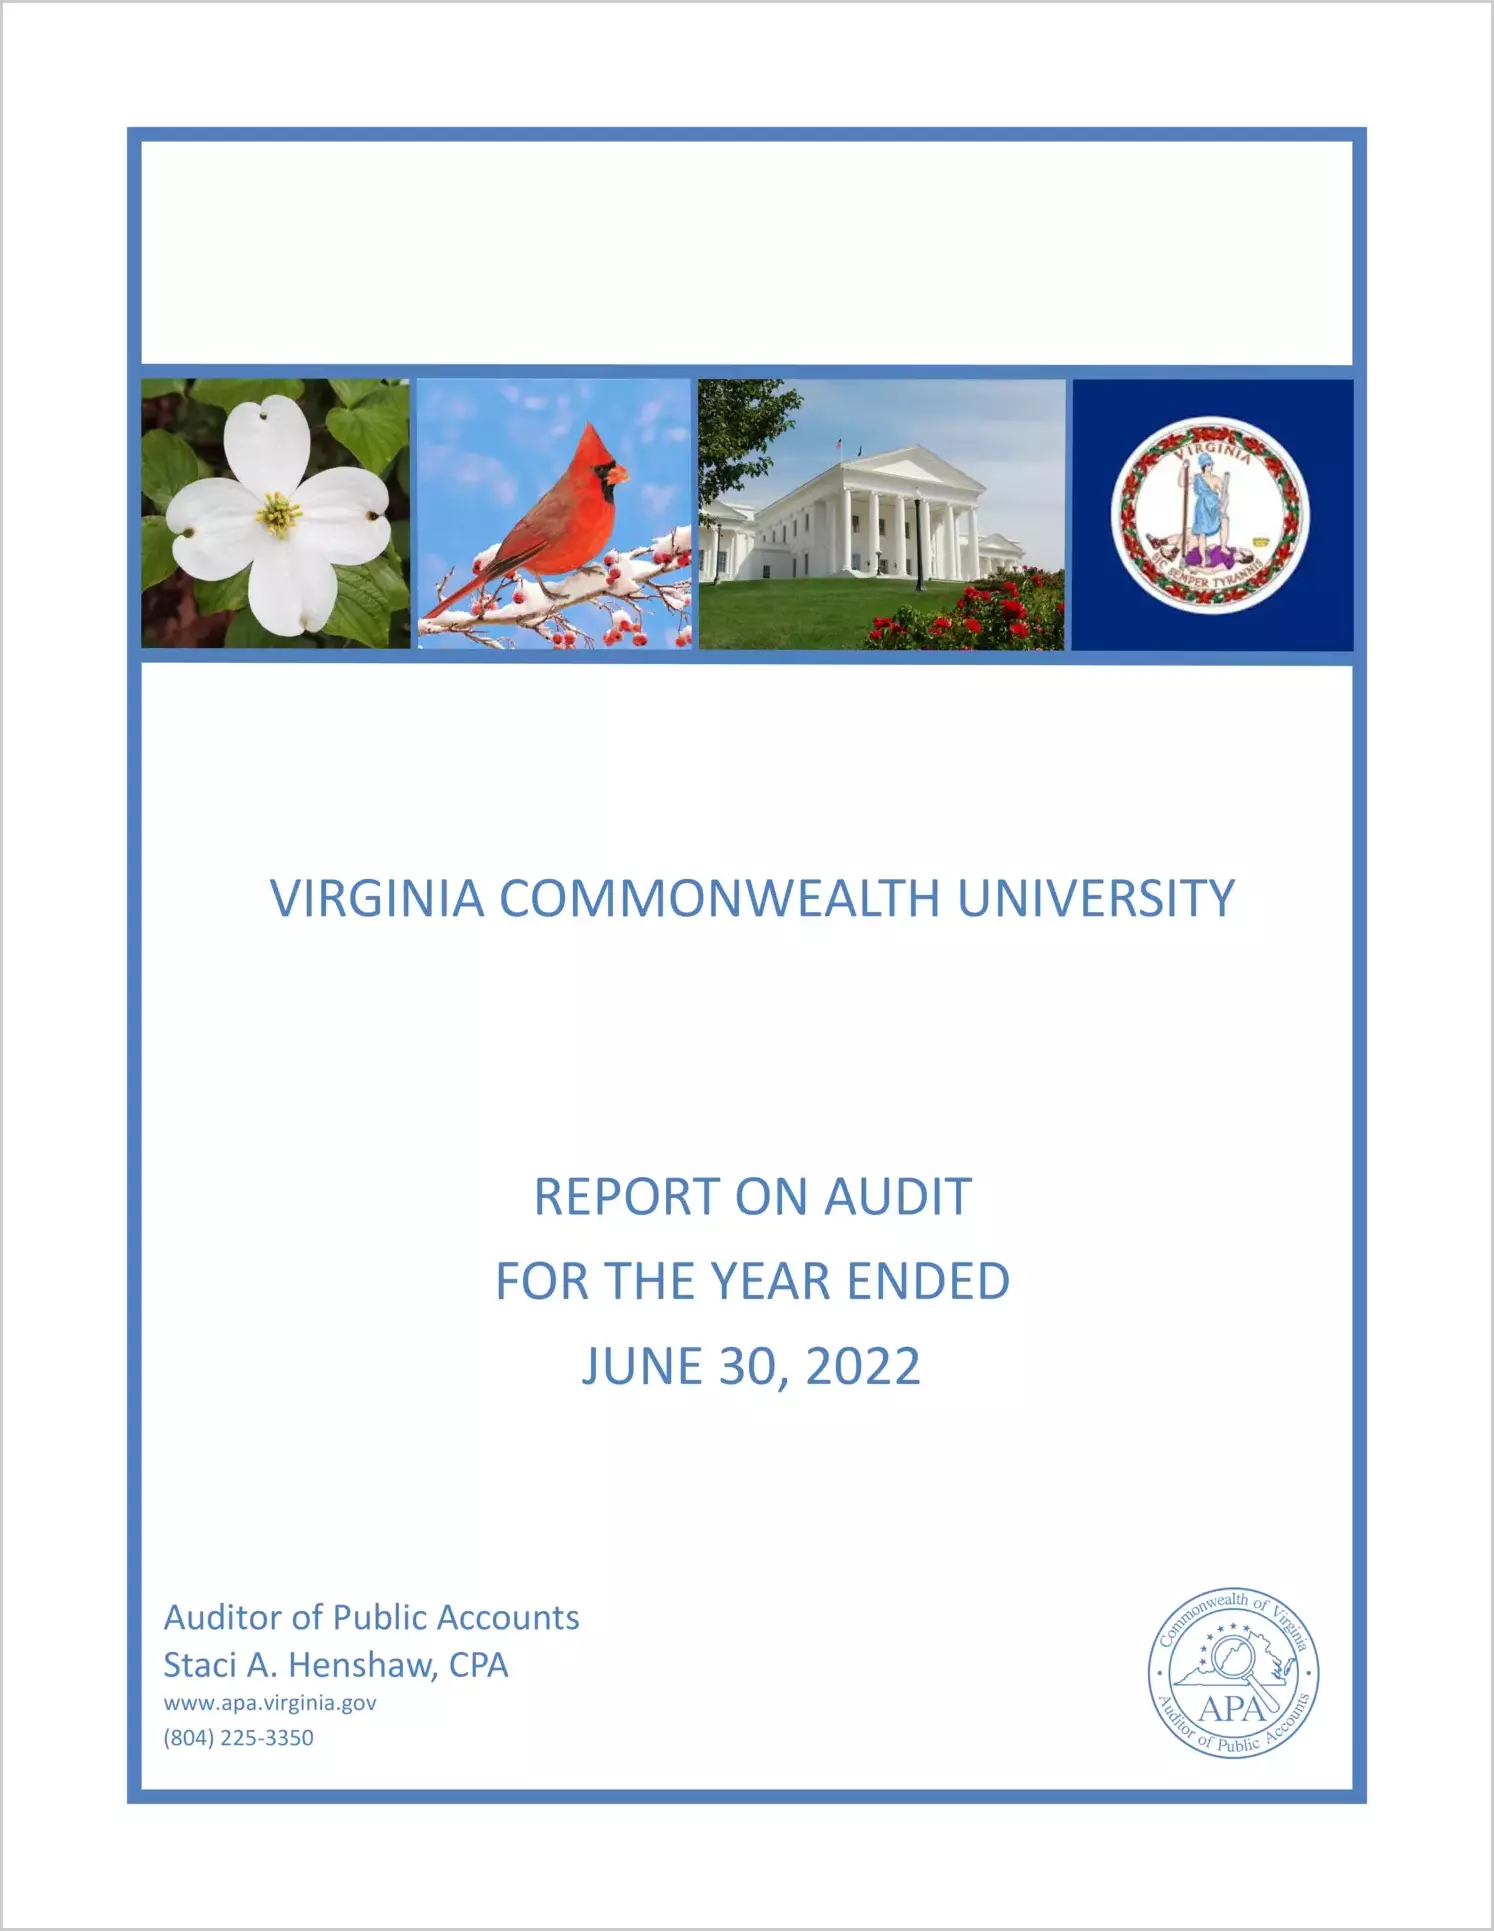 Virginia Commonwealth University for the year ended June 30, 2022